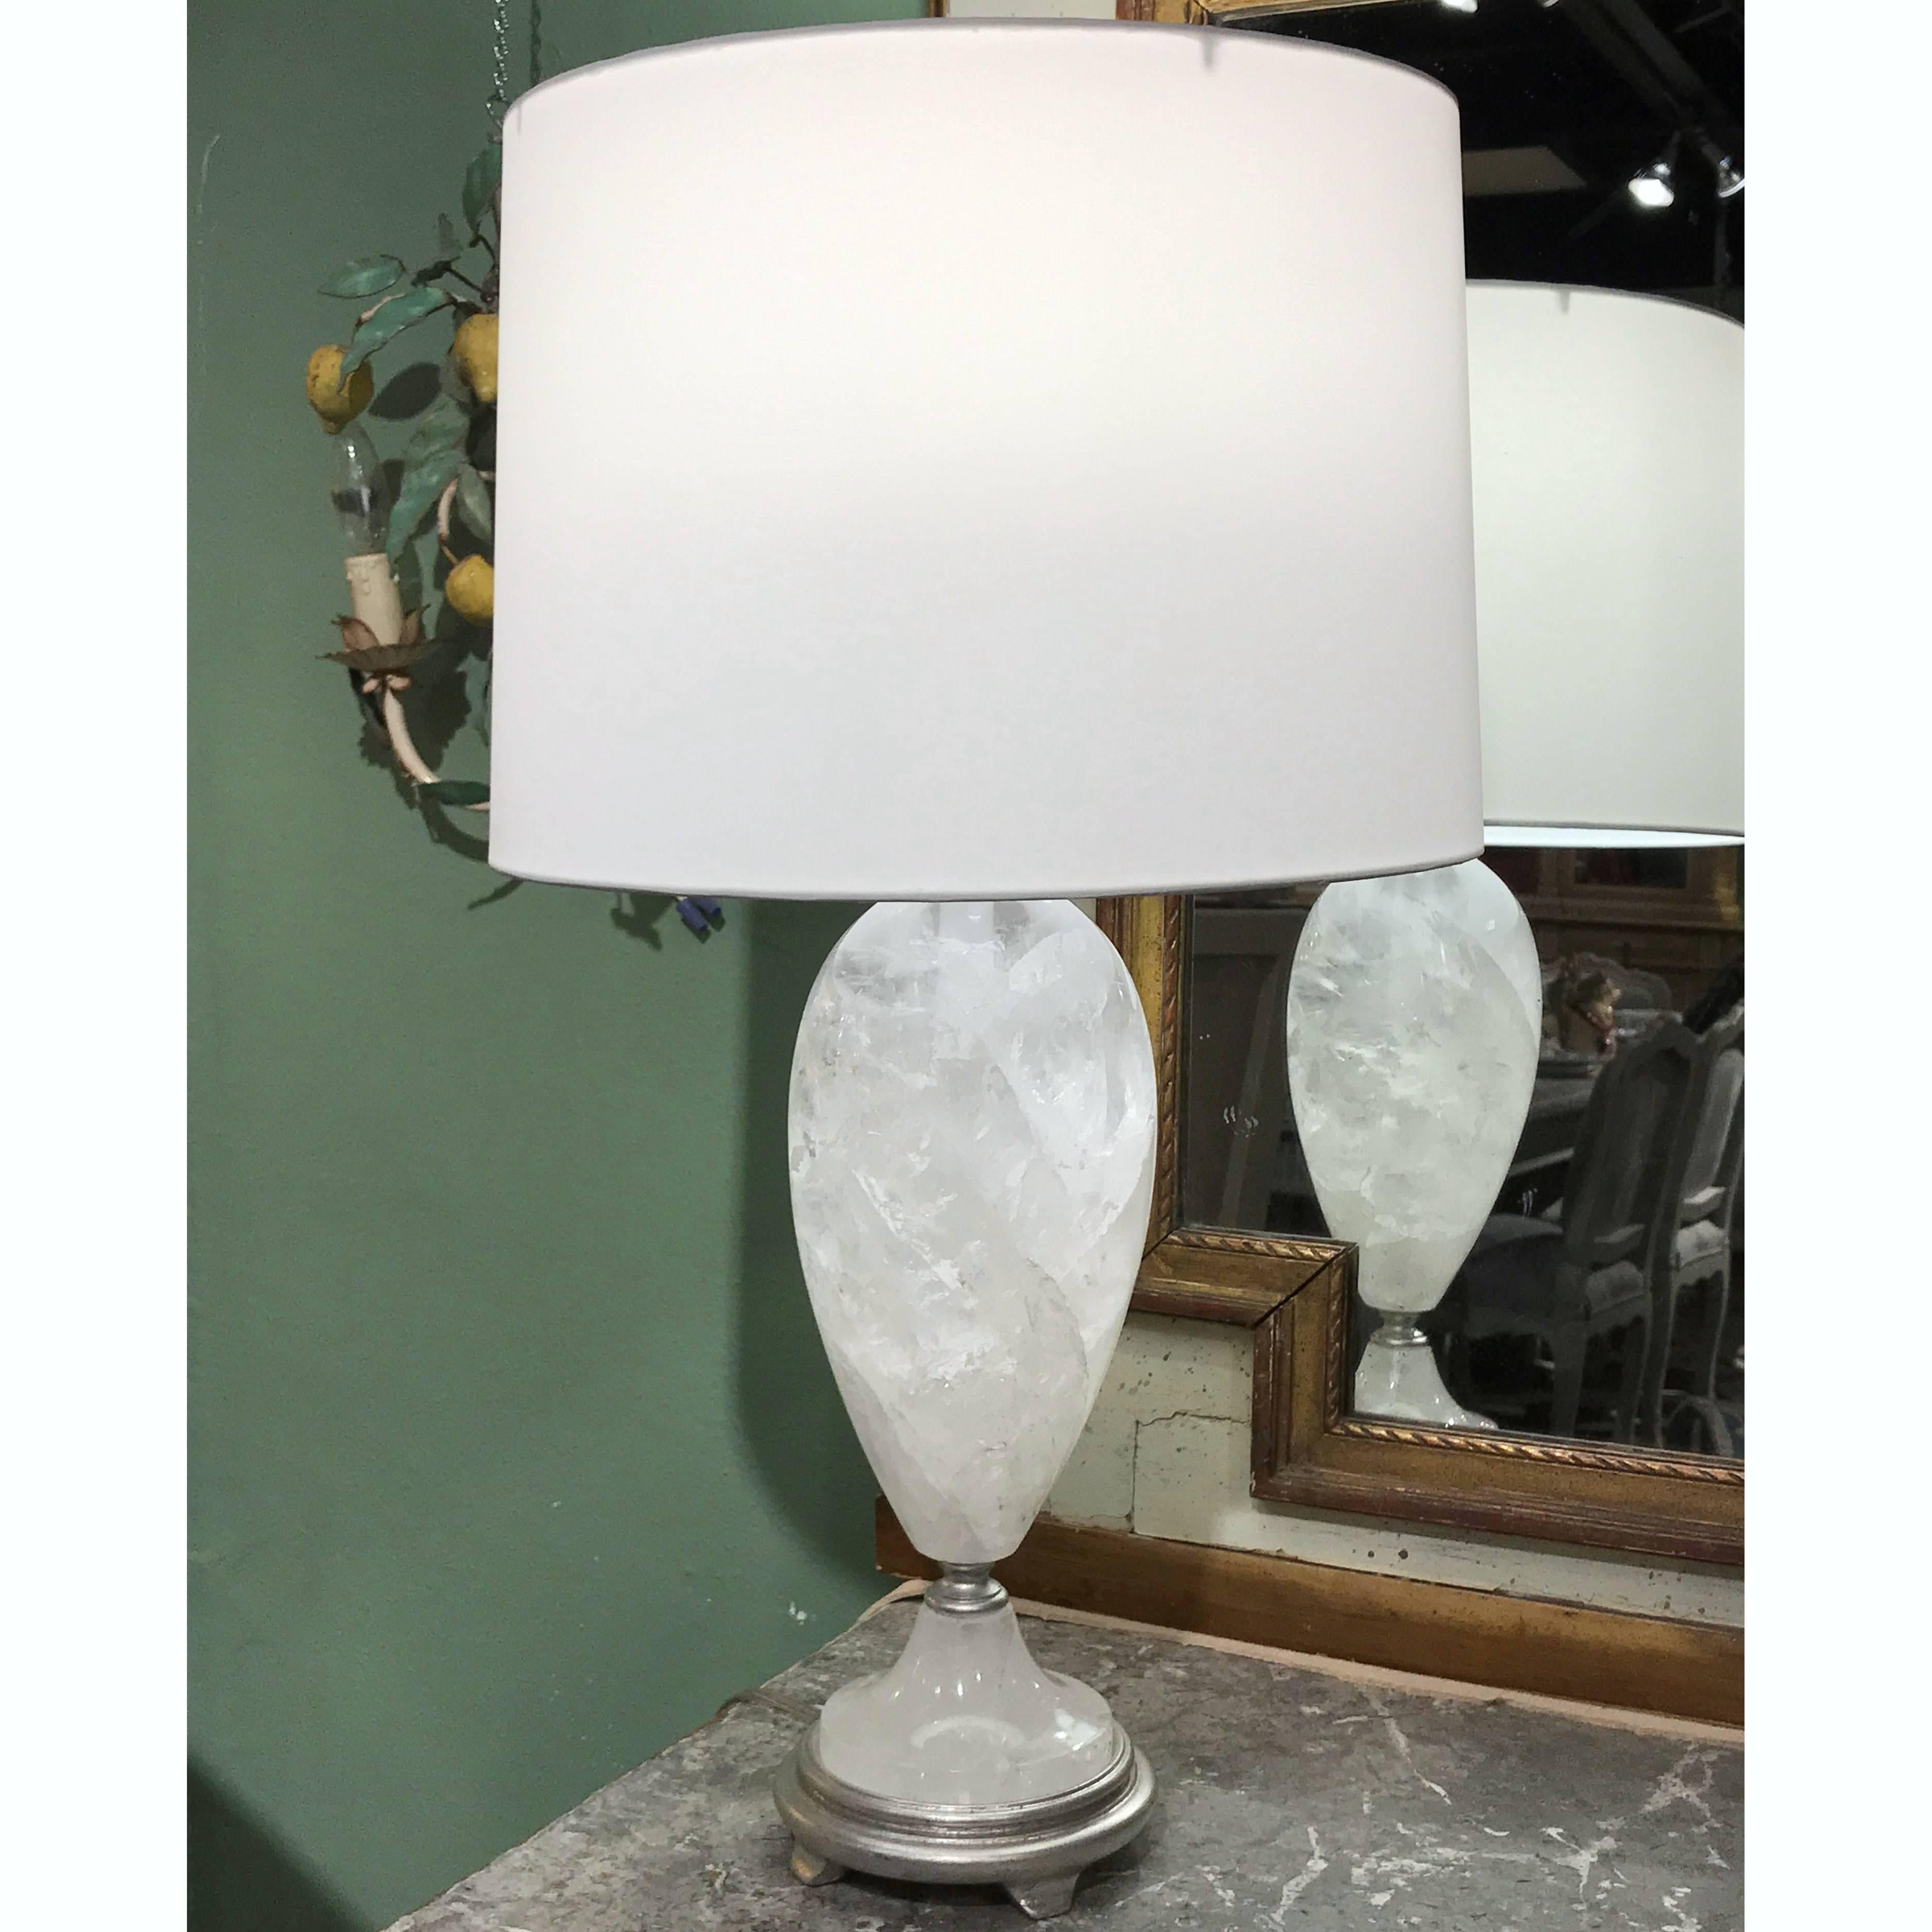 Bring elegance to your formal living room with this sophisticated pair of late 20th century modern rock crystal urns table lamps. The hand-carved, rounded, crystal body of the contemporary lamp is placed on a sturdy wooden base with a silver leaf